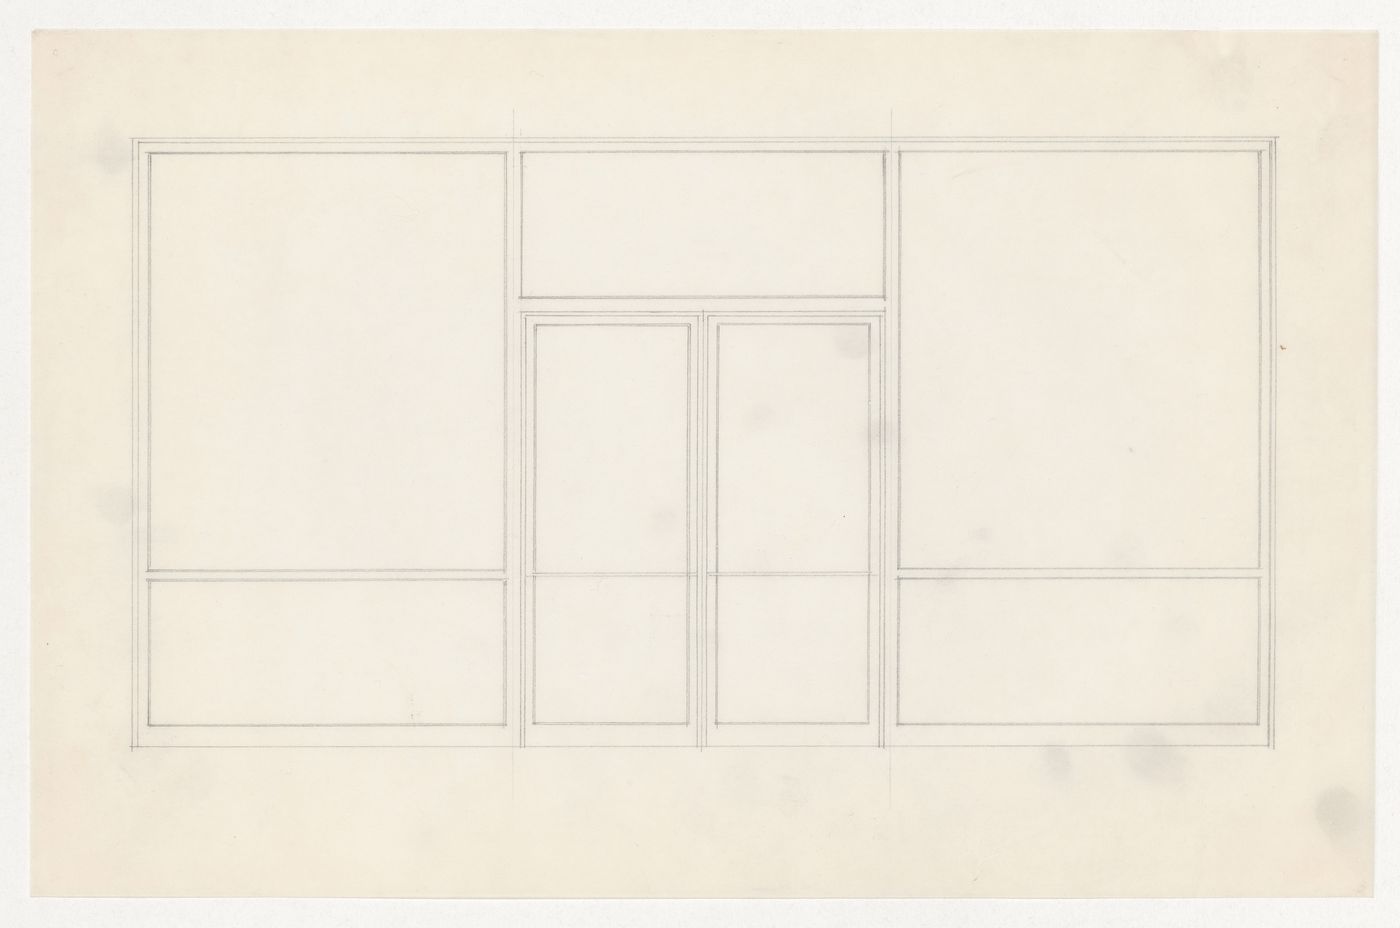 Elevation for entrance for the Metallurgy Building, Illinois Institute of Technology, Chicago